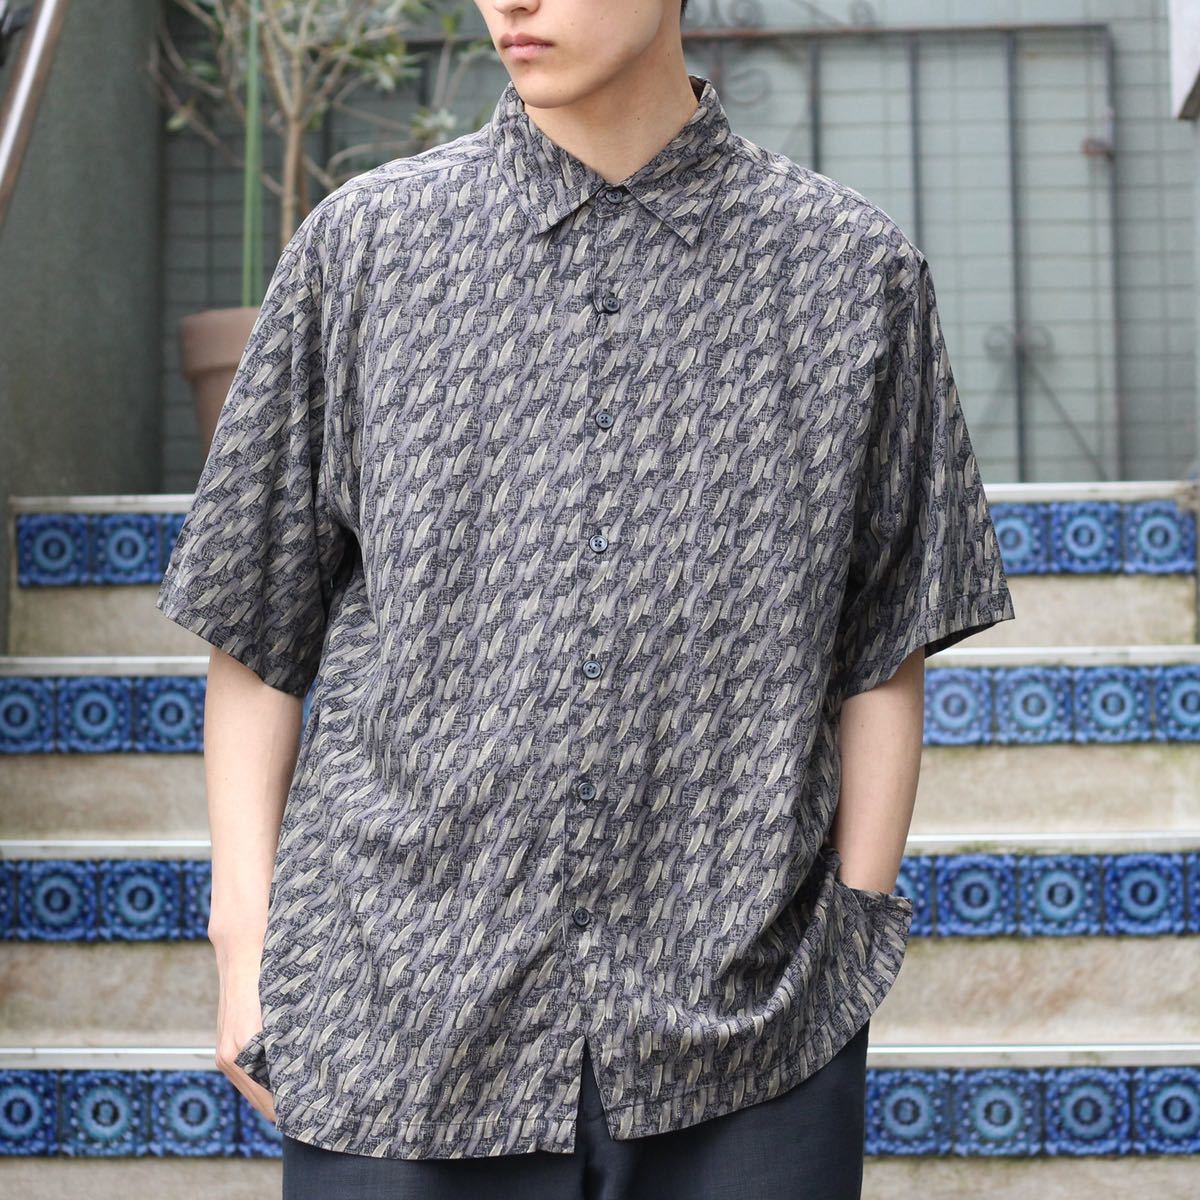 USA VINTAGE HALF SLEEVE PATTERNED ALL OVER SILK SHIRT/アメリカ古着半袖総柄シルクシャツ_画像1